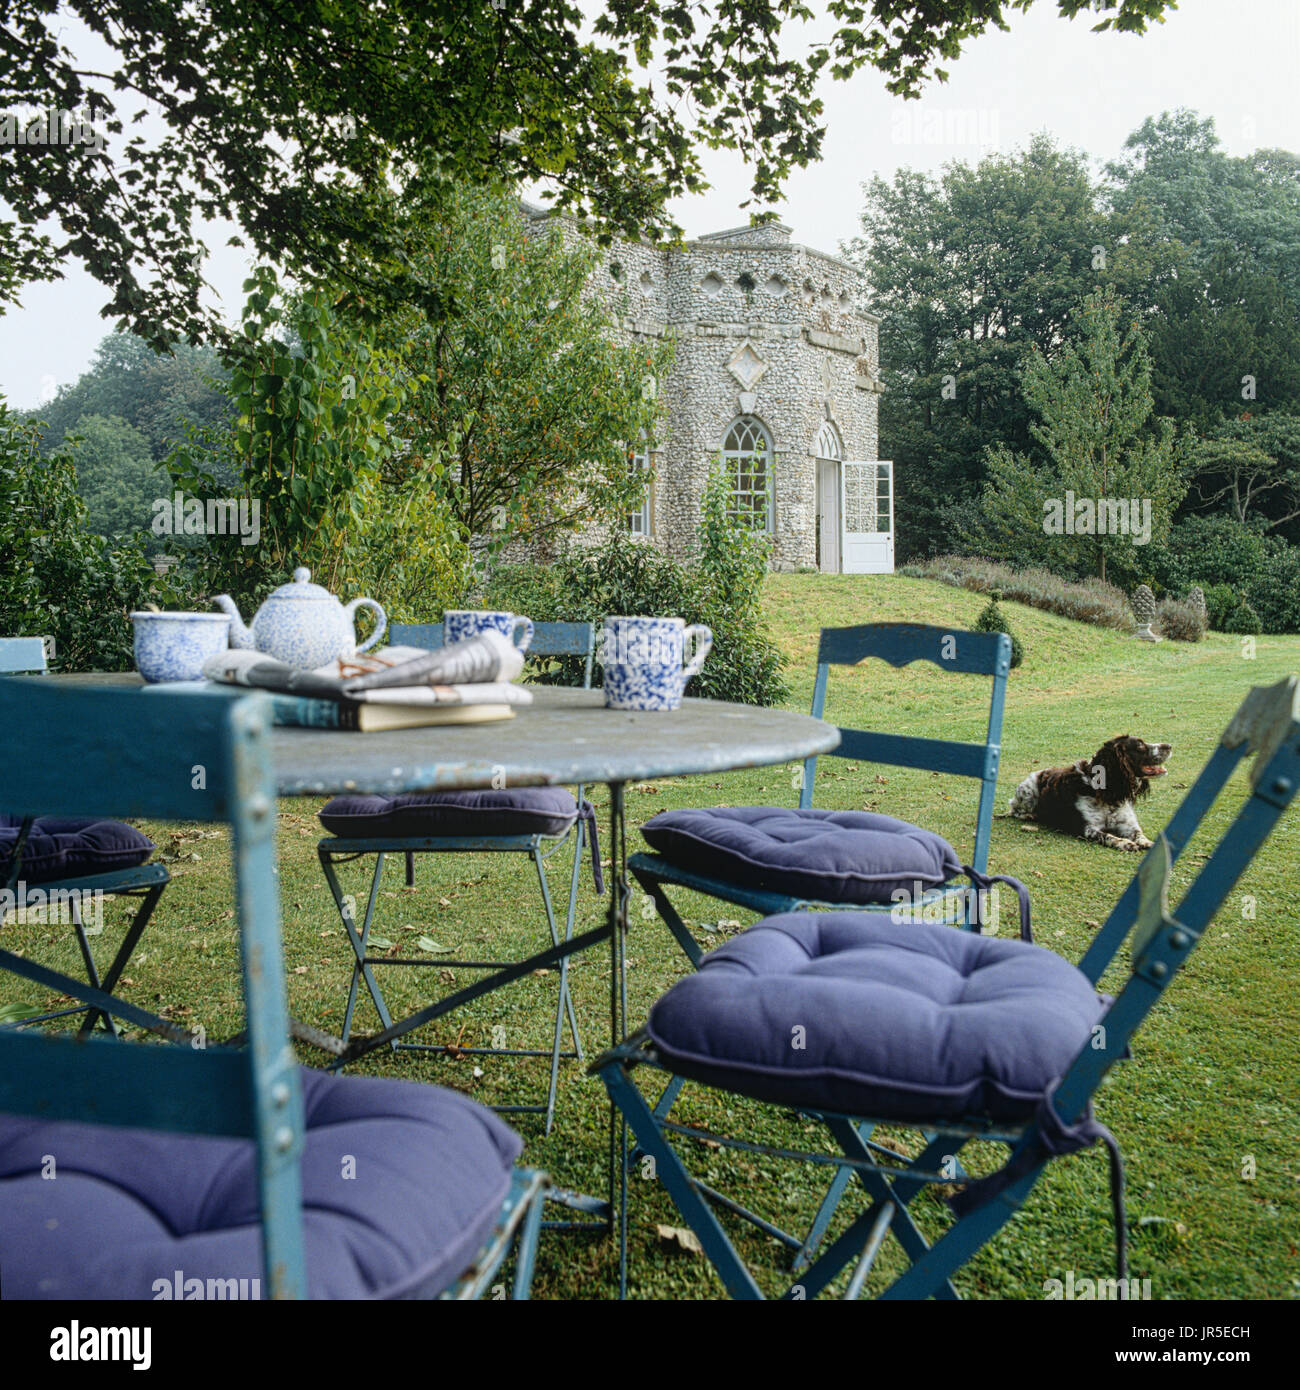 Outdoor furniture on lawn Stock Photo